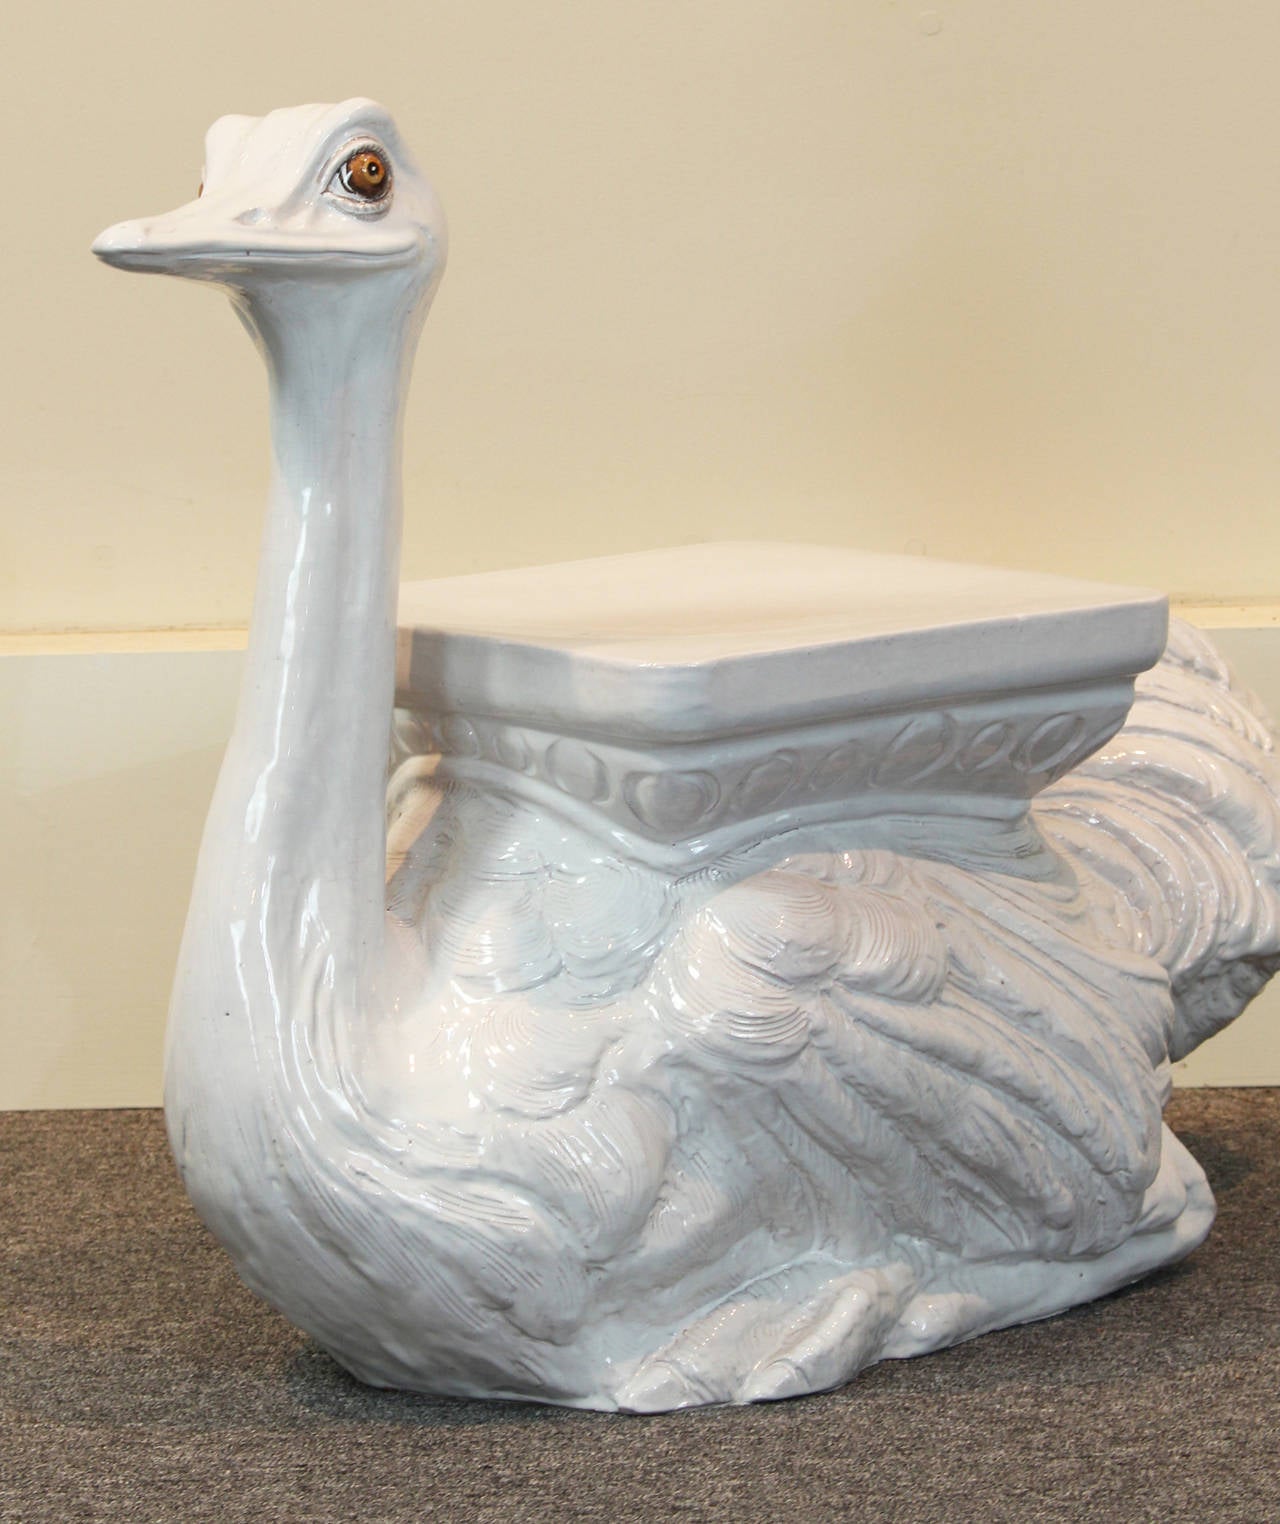 A fabulous vintage hand-painted Italian ceramic sculptural ostrich garden seat dating from the 1960s.